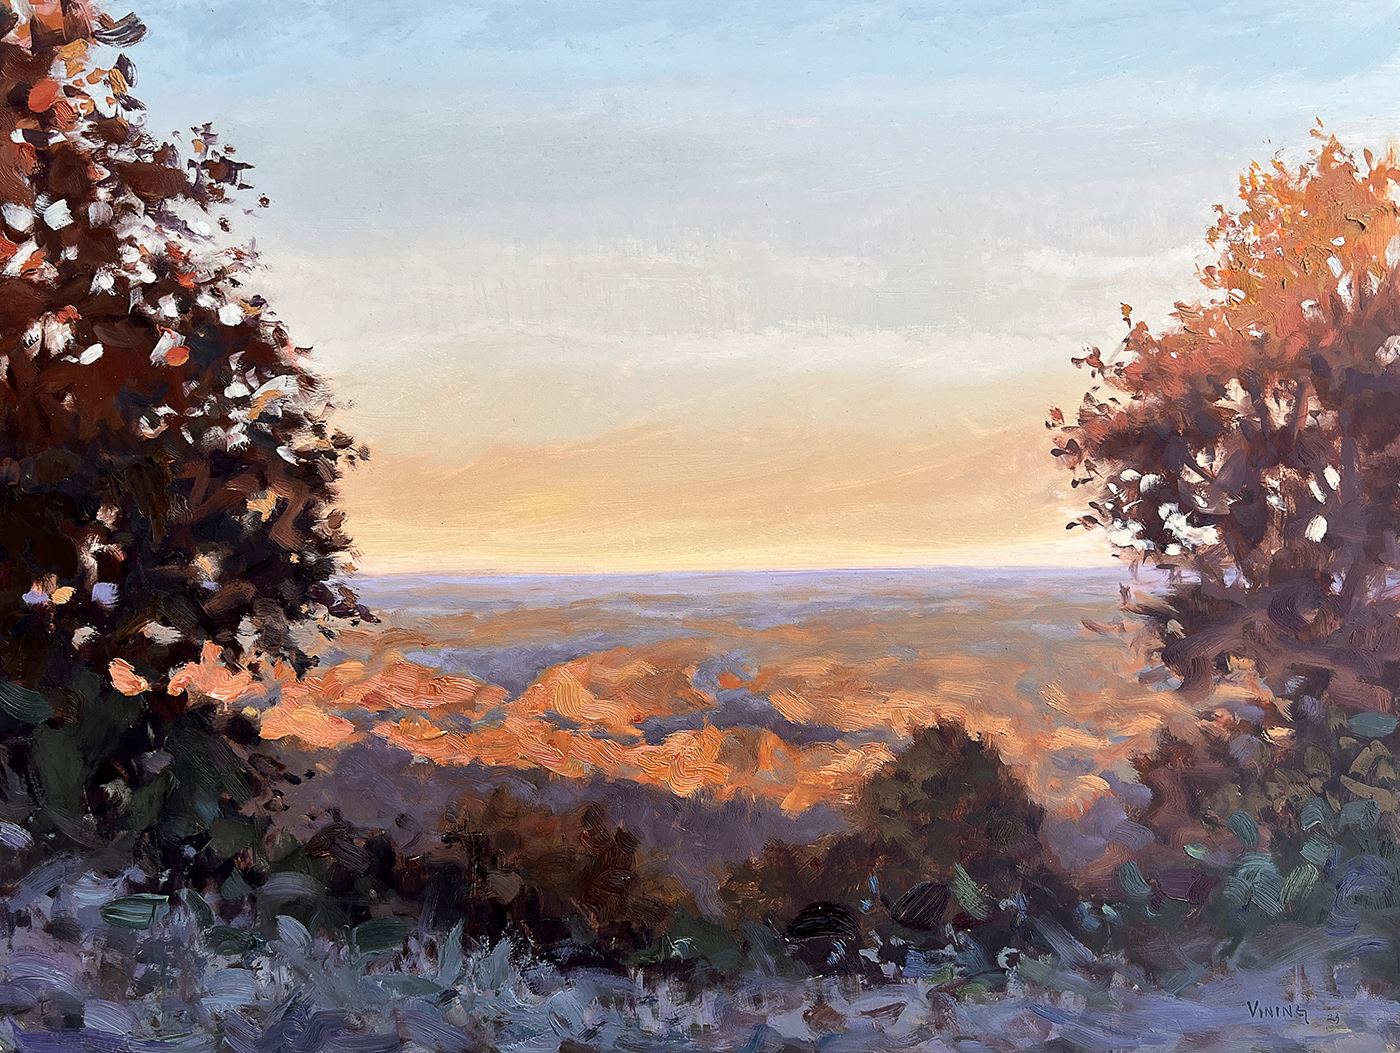 oil painting of sunset; perspective overlooking mountains with foliage in the foreground. Trees have deep set tones, framing the picture